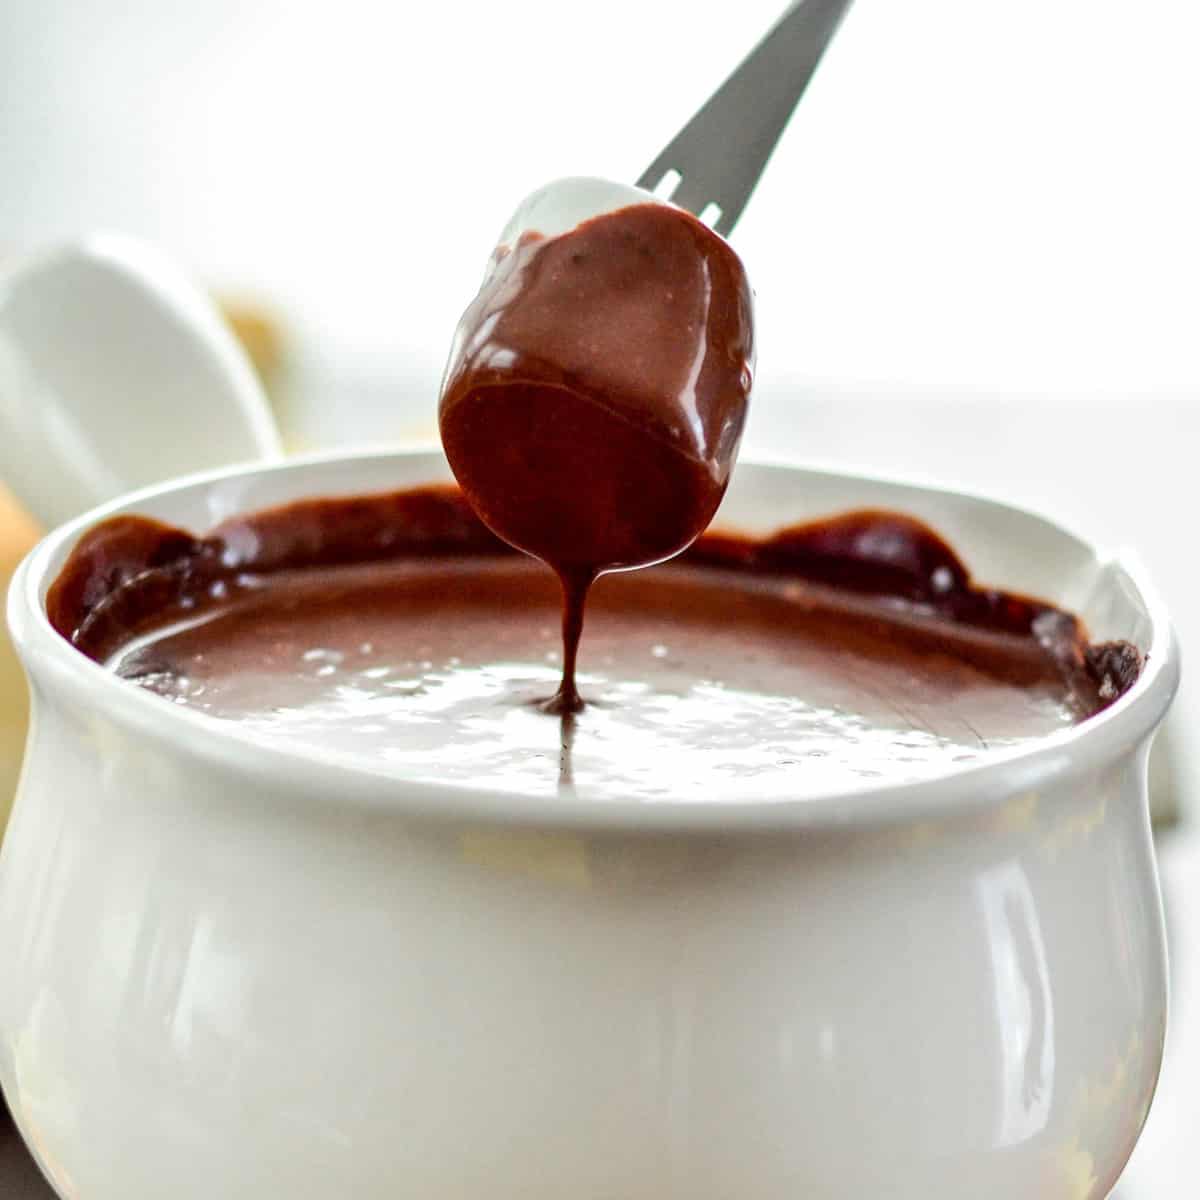 Front view of a marshmallow being dipped into Vegan Chocolate Fondue